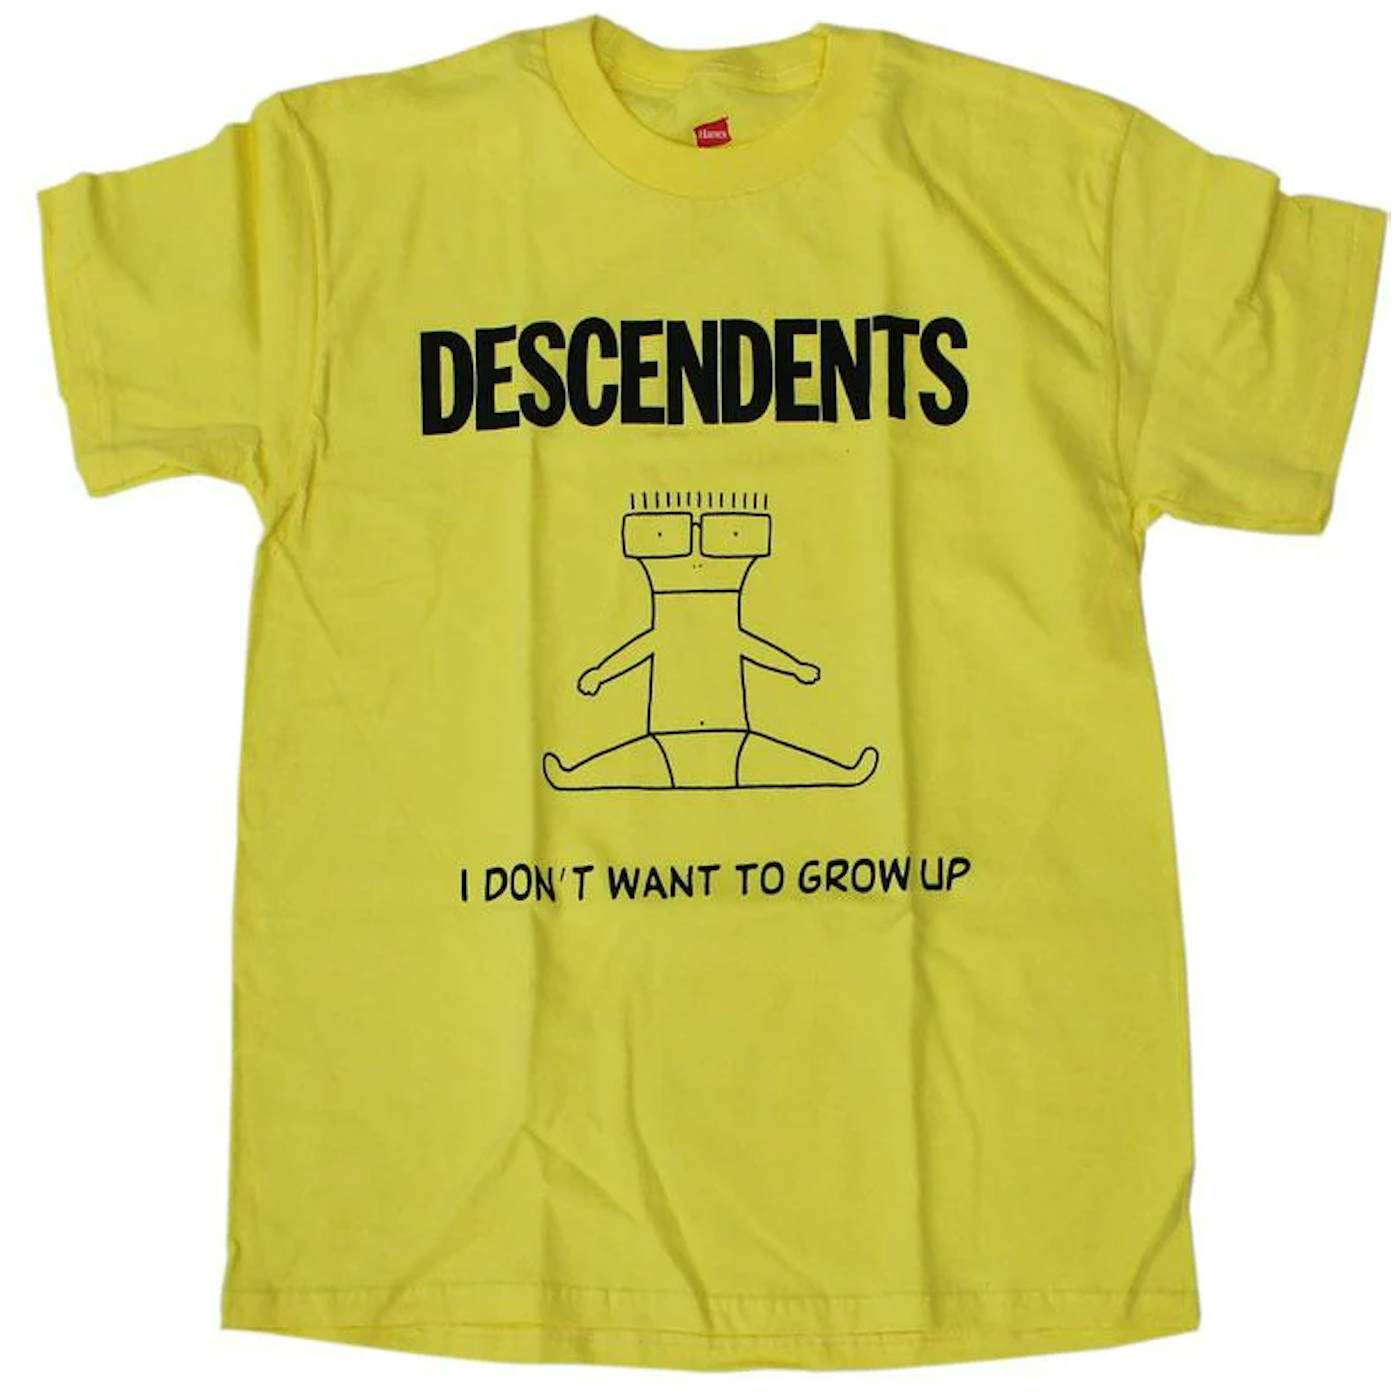 Descendents - I Don't Want To Grow Up T-shirt - Large